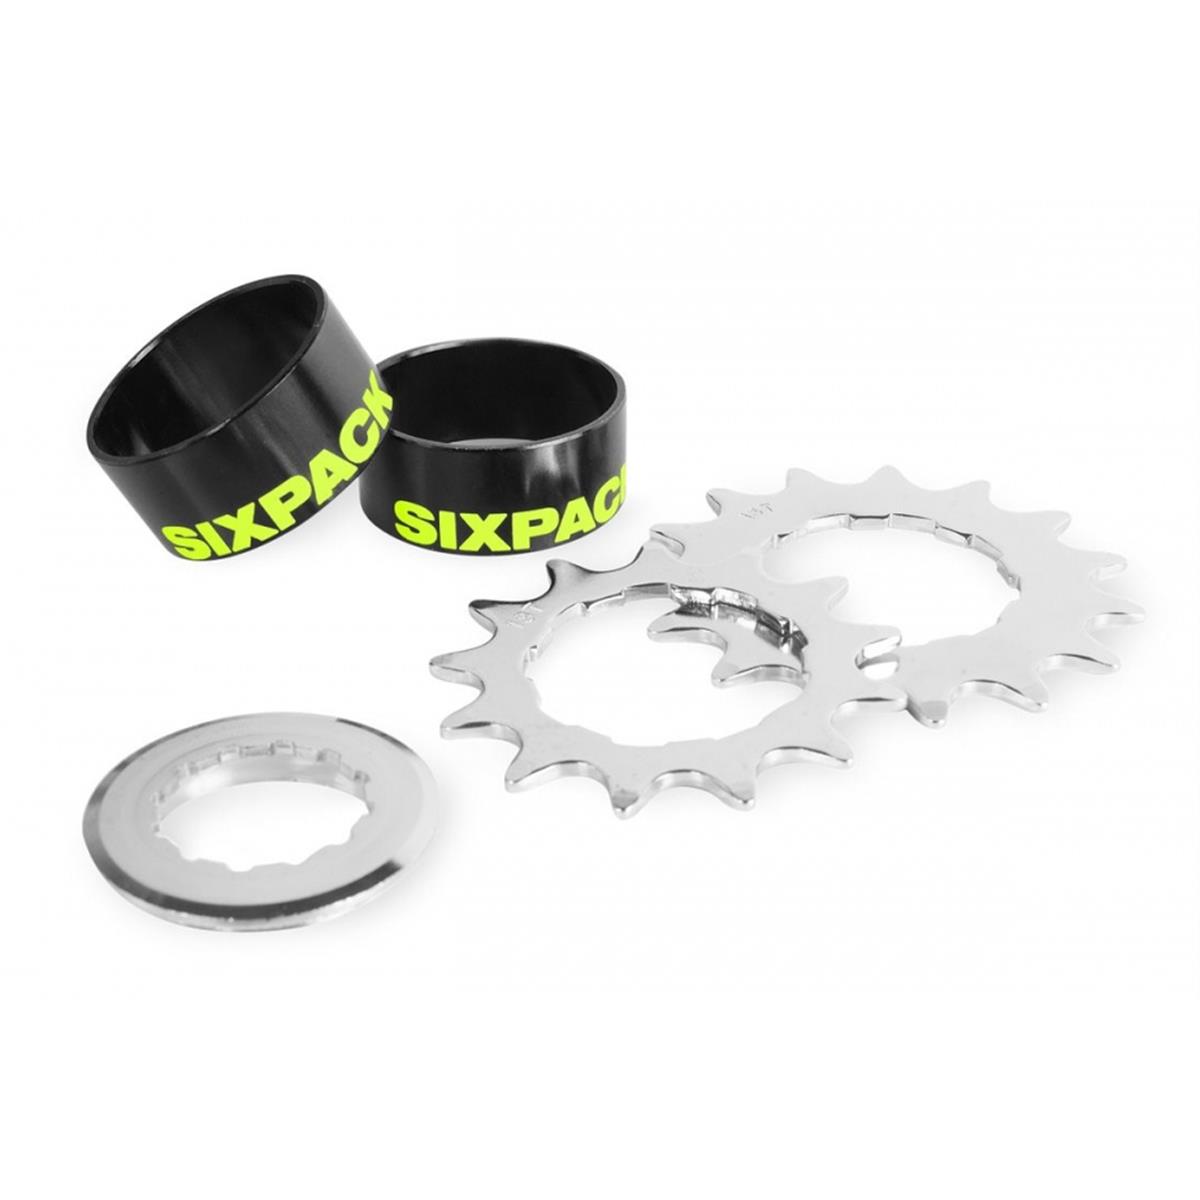 Sixpack Kit conversione Single Speed  Black/Neon Yellow, incl. 2 Chainrings (13 & 15T), fits 8/9710-speed Shimano/Sram Freewheels